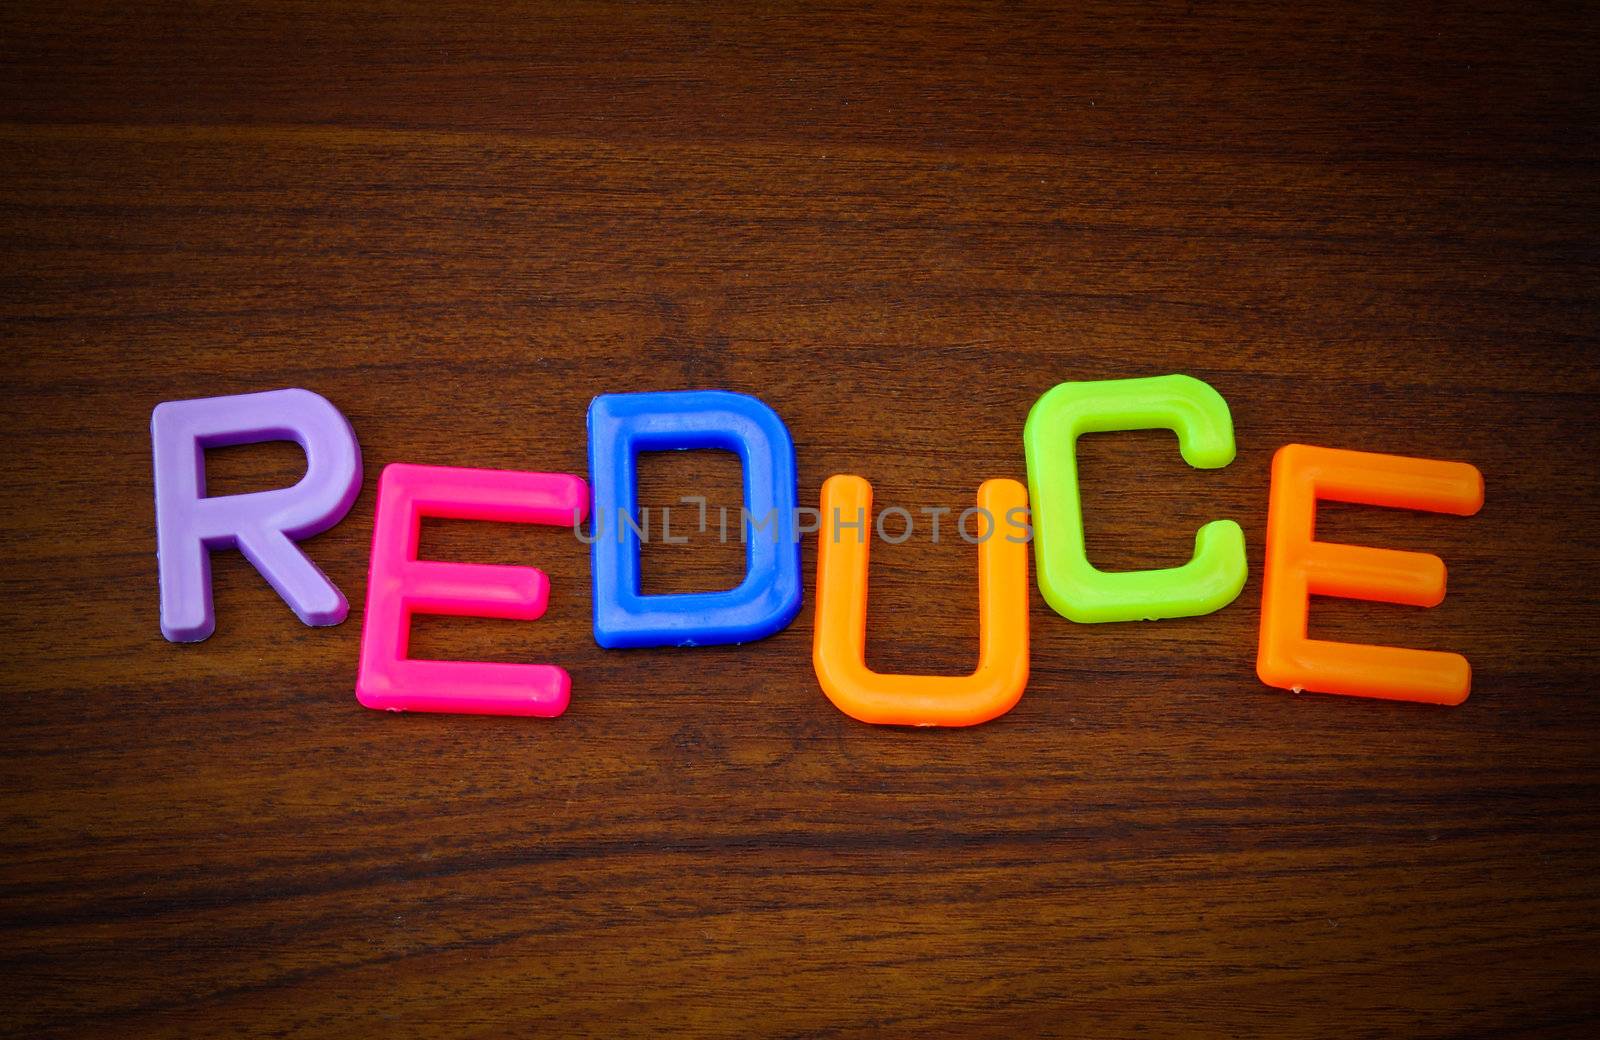 Reduce in colorful toy letters on wood background